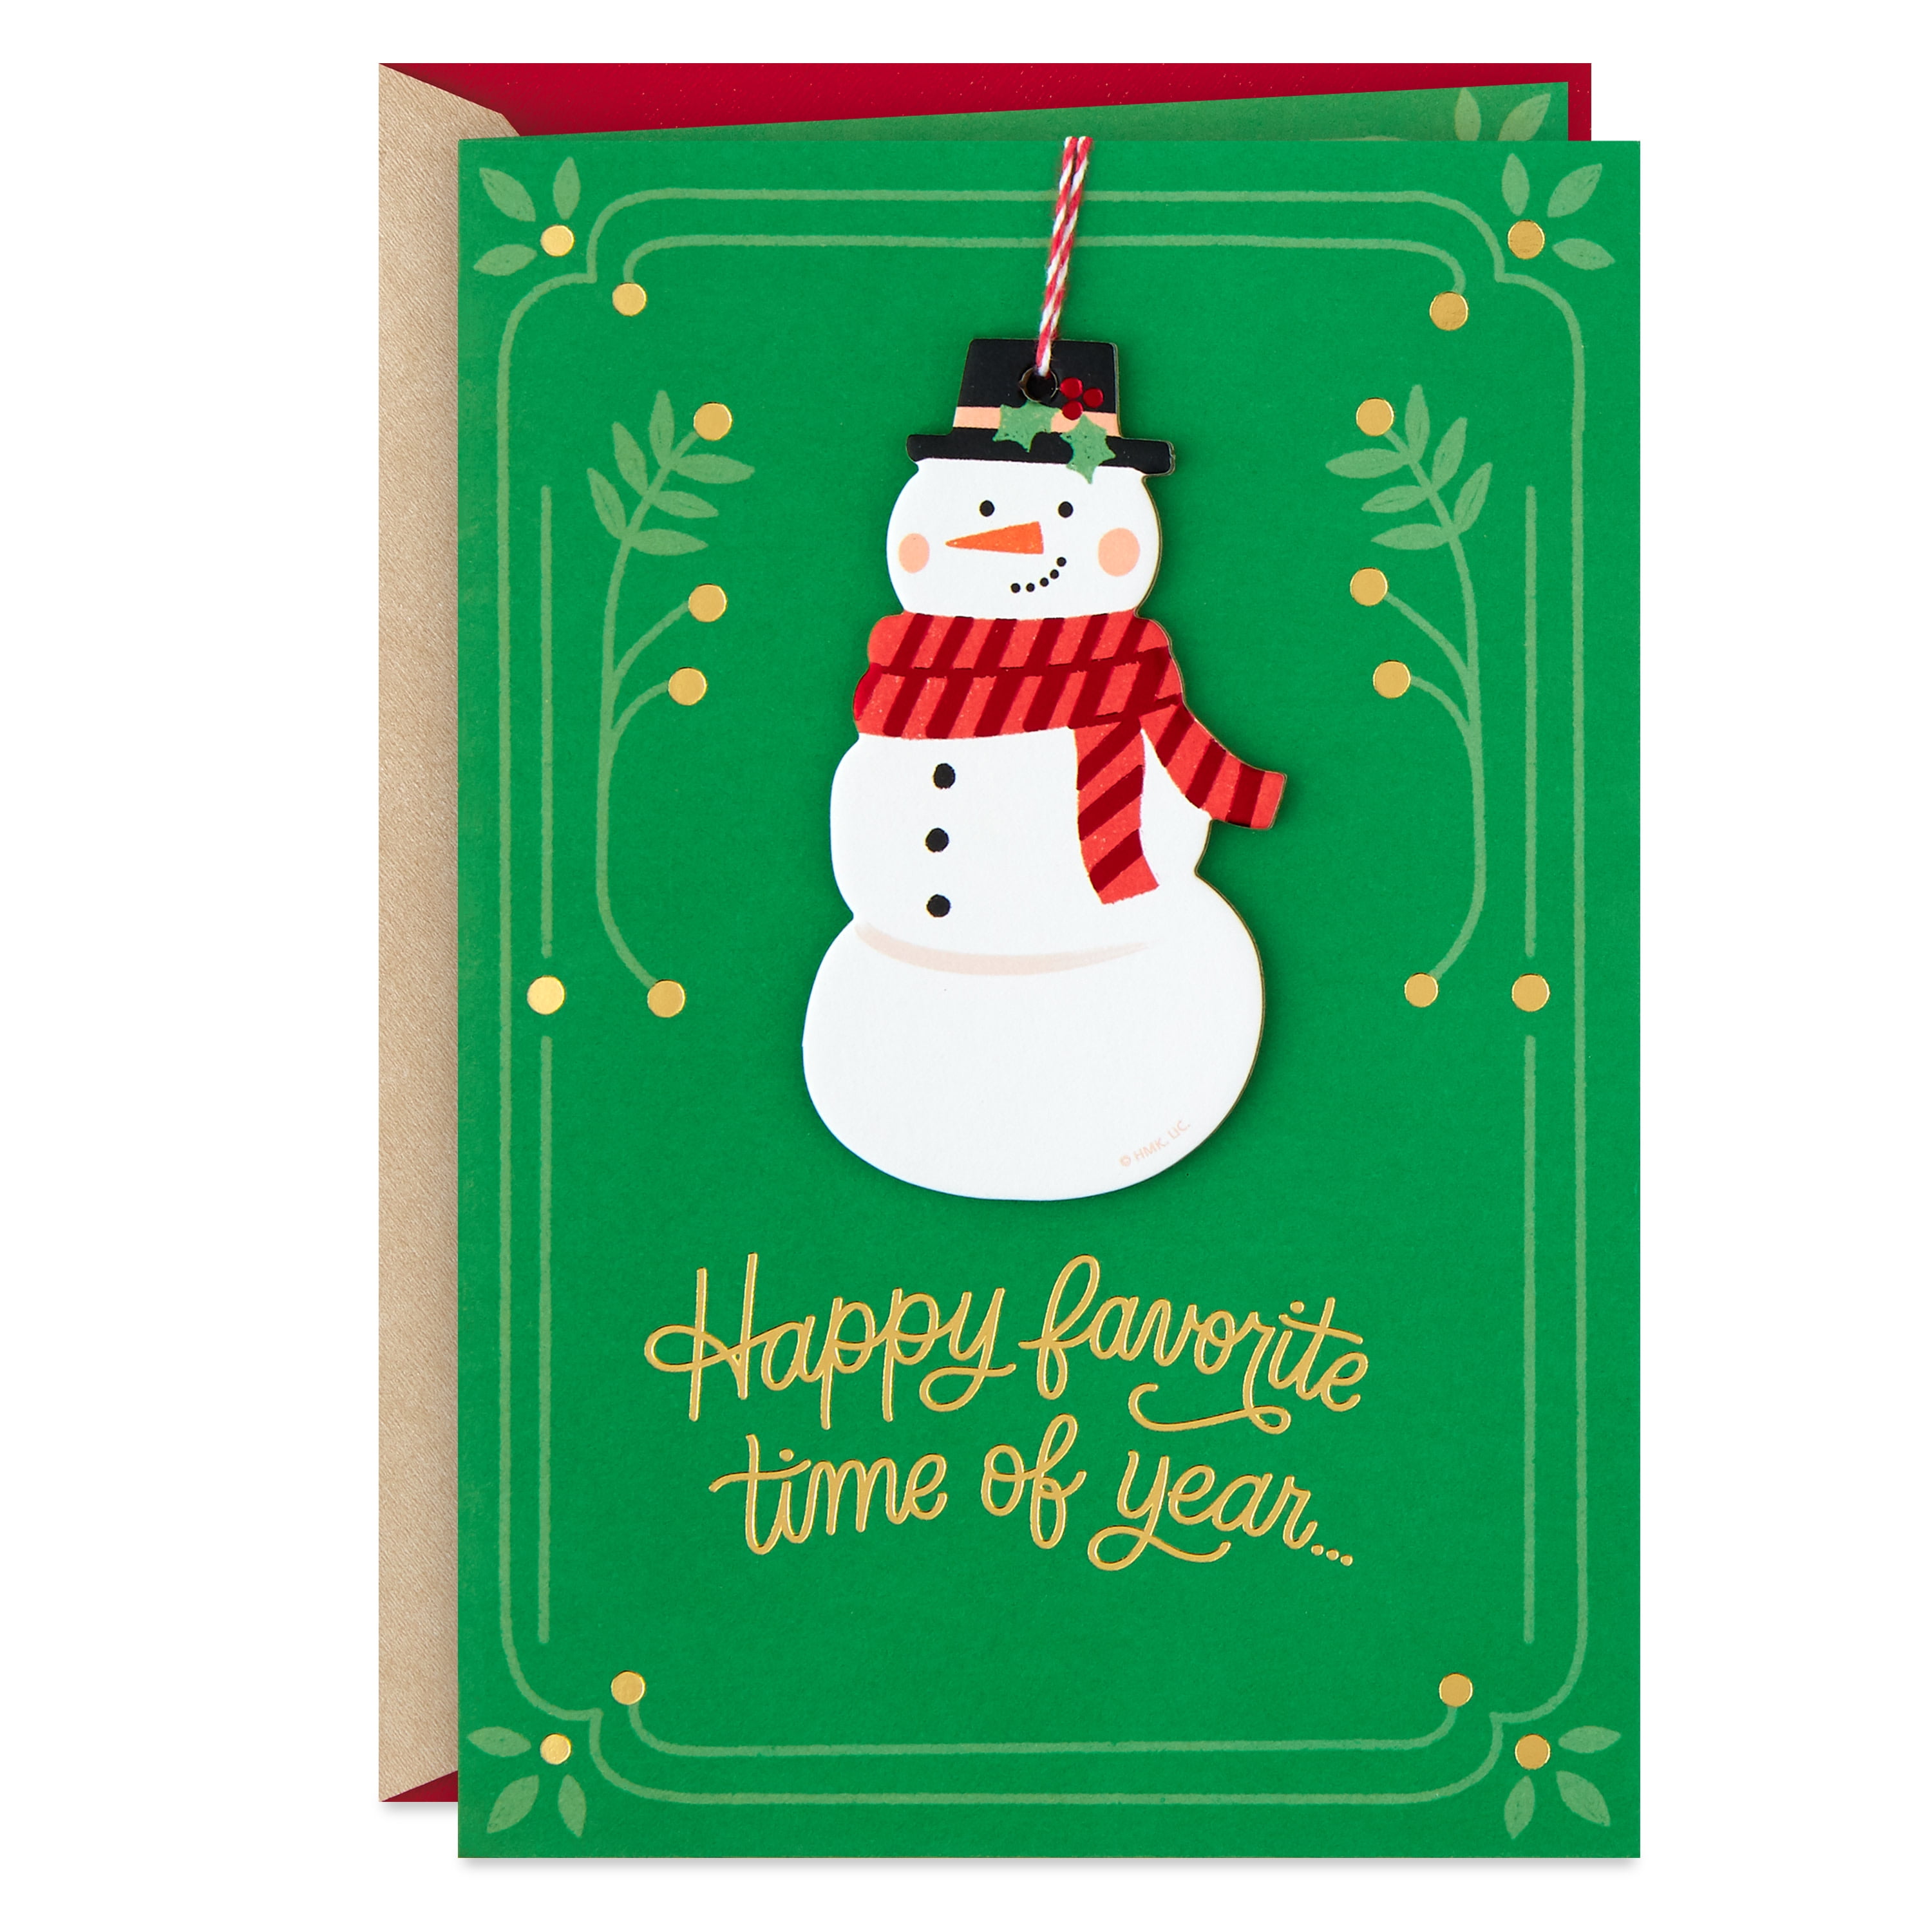 Details about   NEW HALLMARK 8 Christmas Cards & ENVELOPES NOTE HOLIDAY JOY TO THE WORLD 5X7 